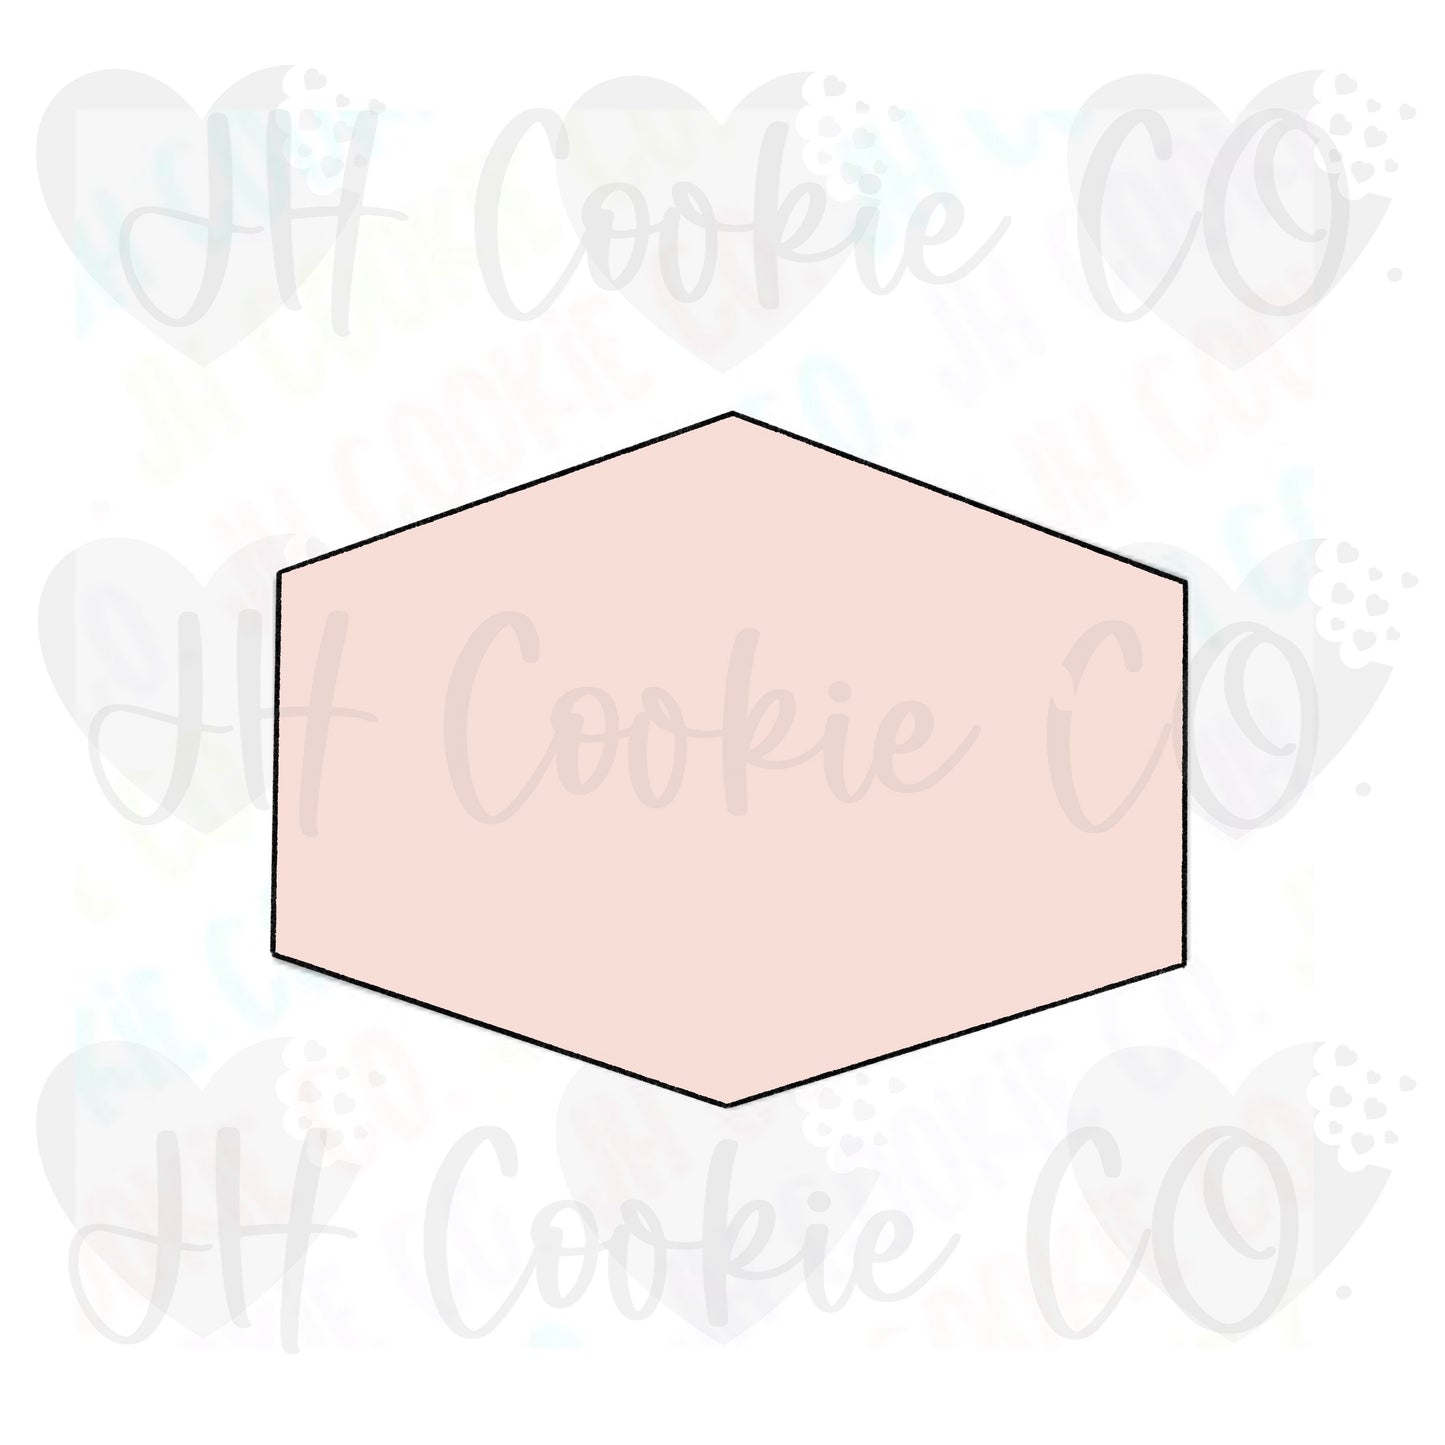 Friday Plaque - Cookie Cutter